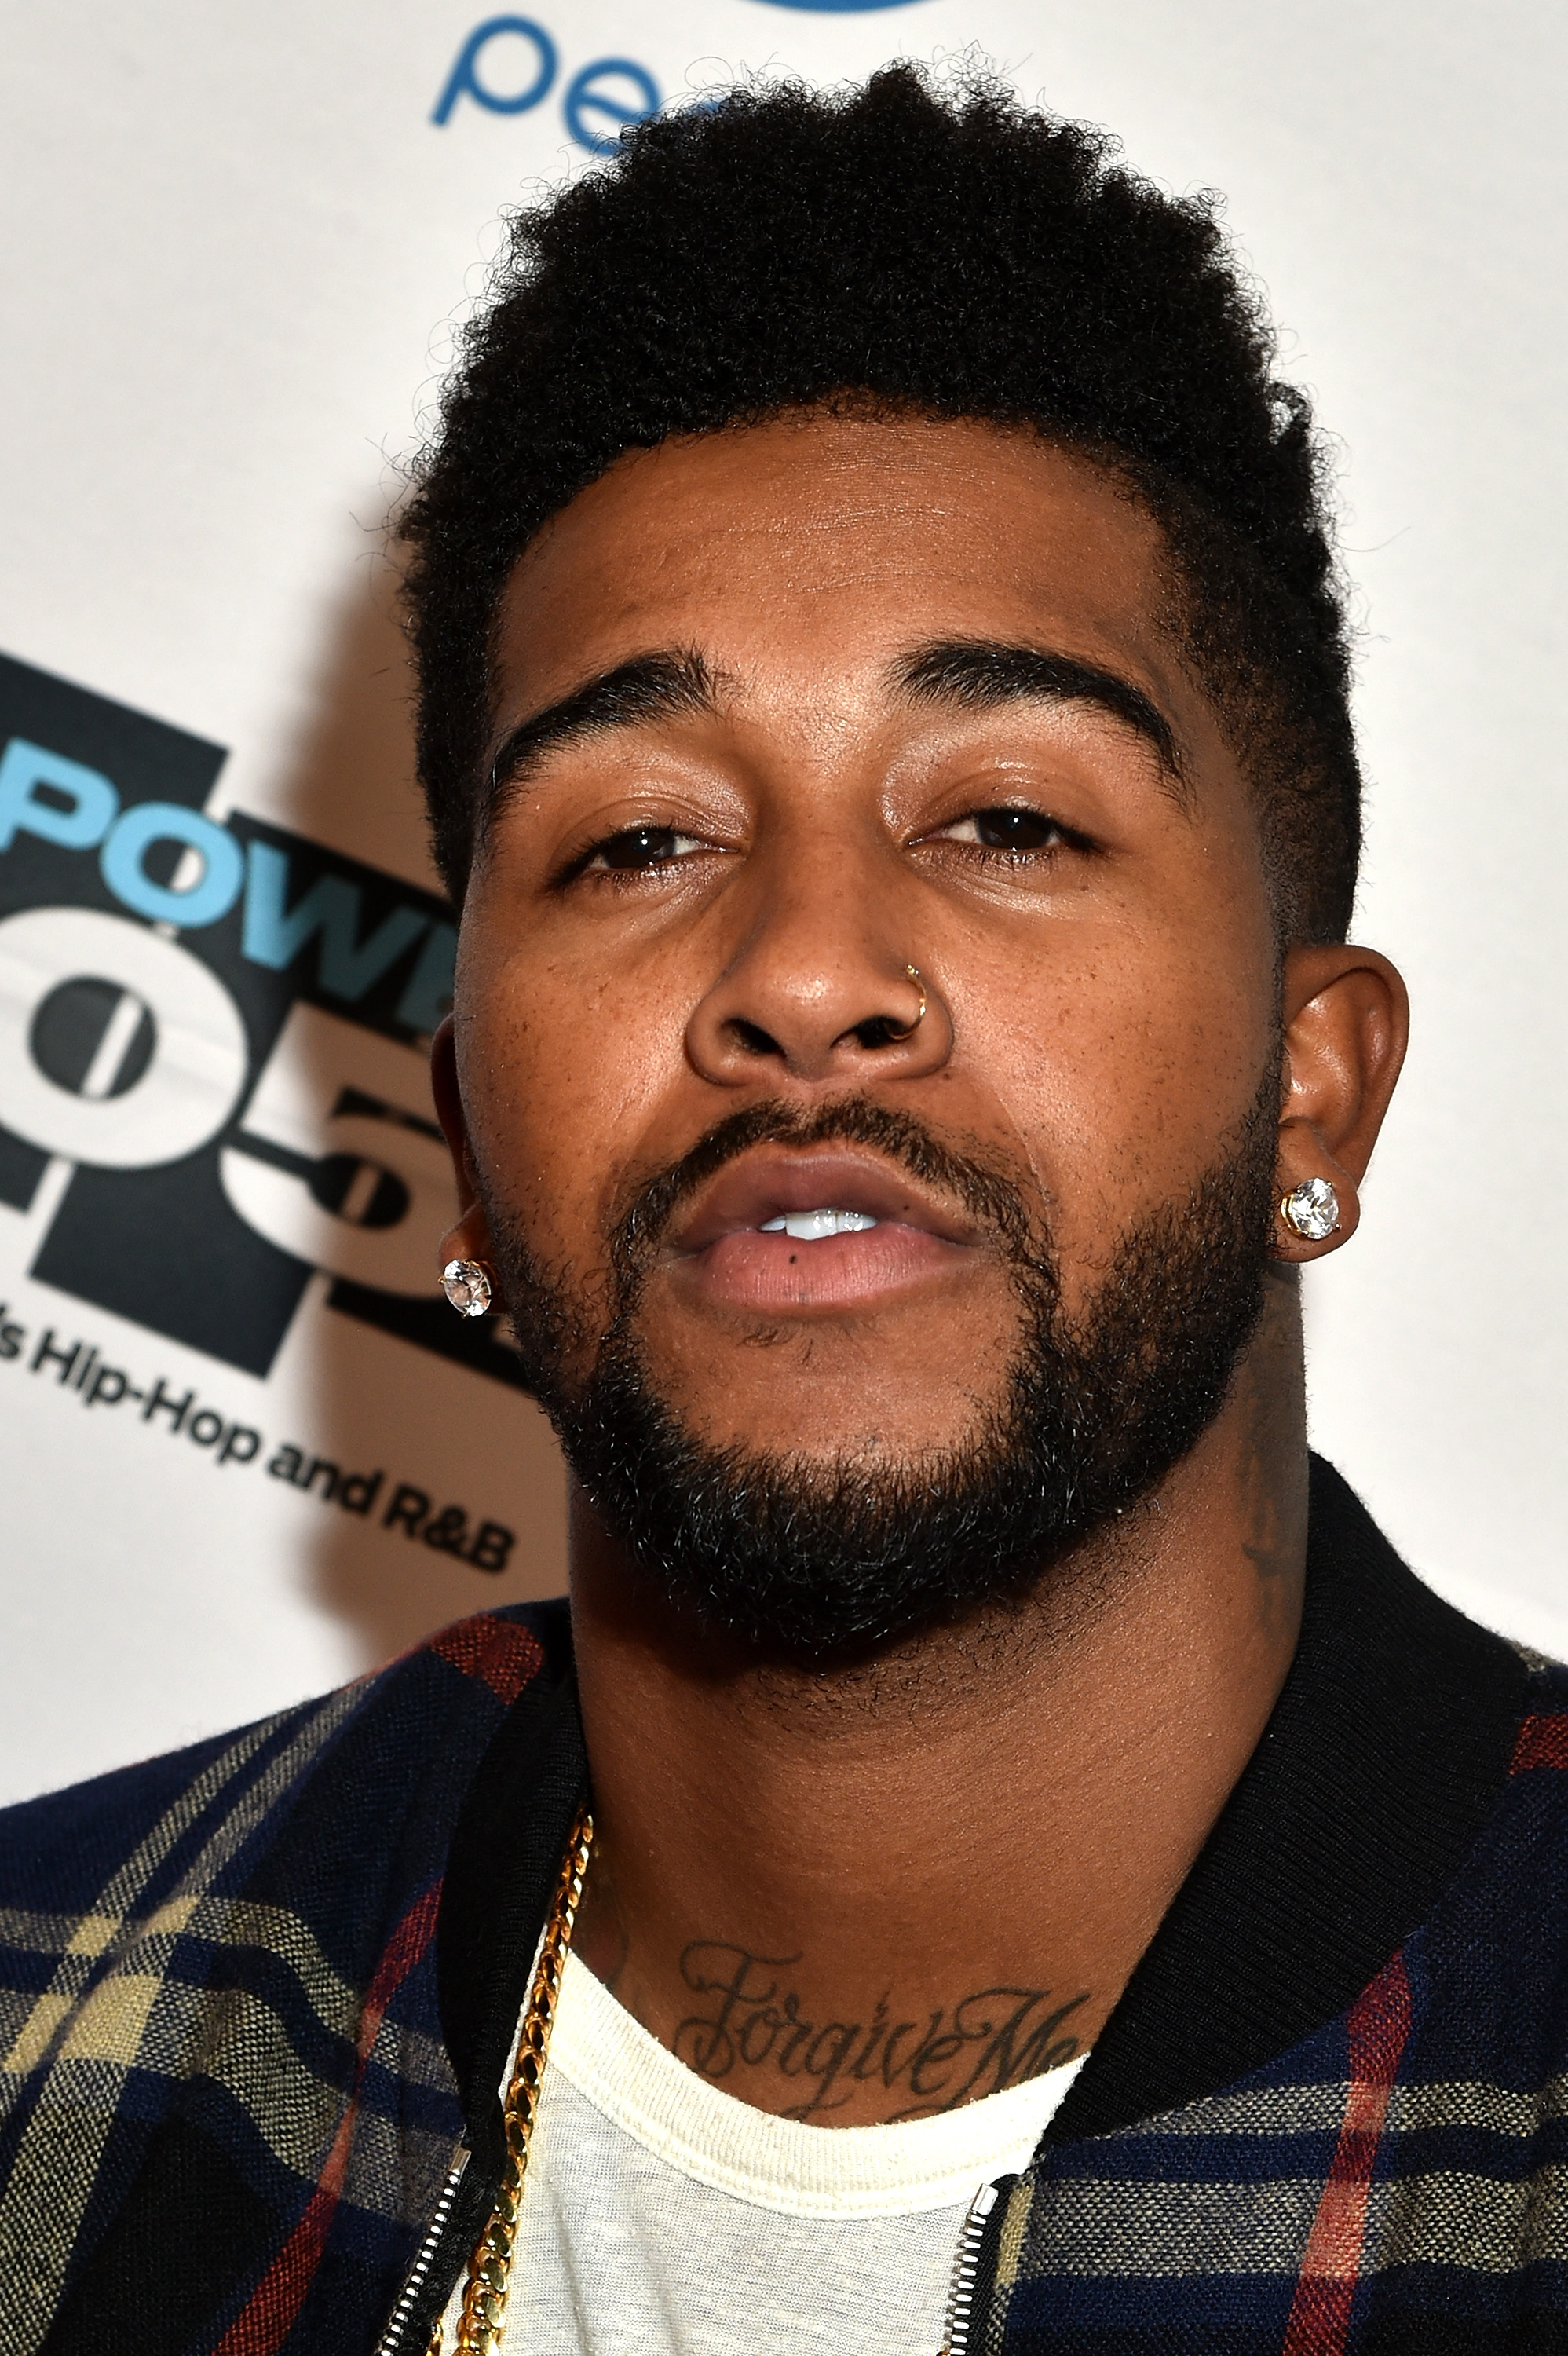 Omarion Replacing Shane Sparks On “America’s Best Dance Crew”